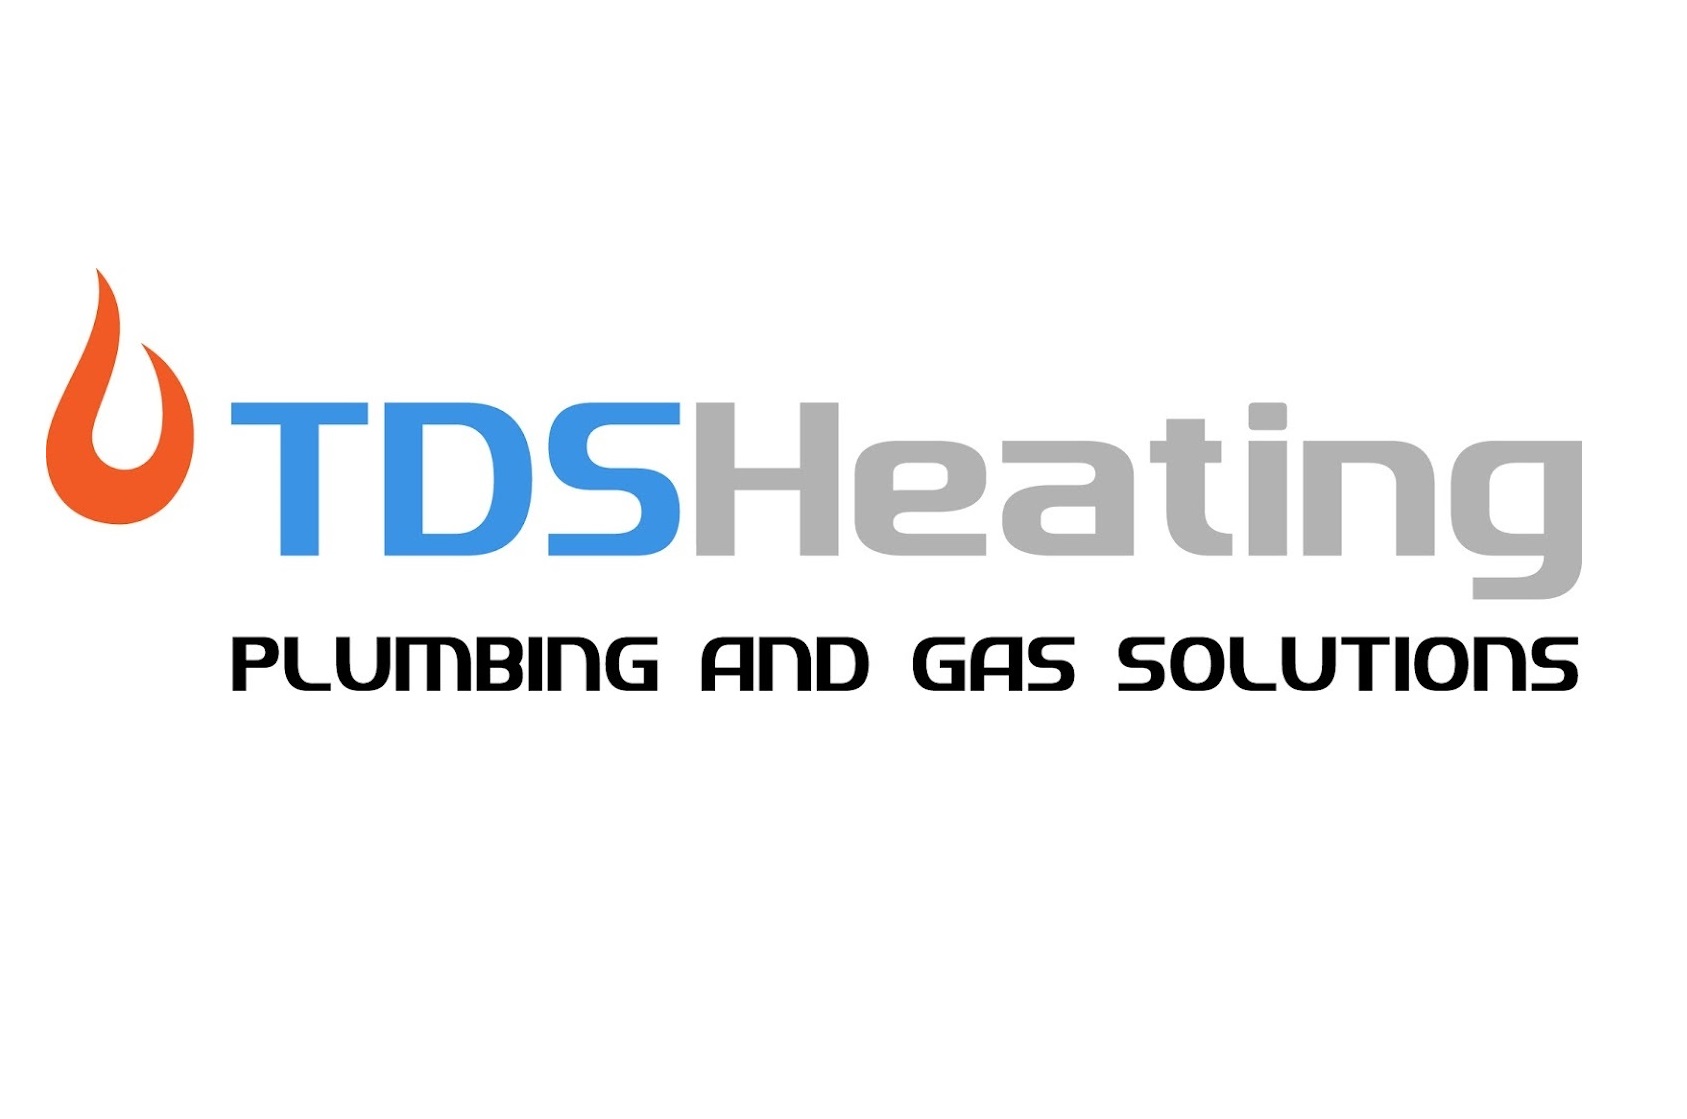 tds heating plumbing and gas solutions logo